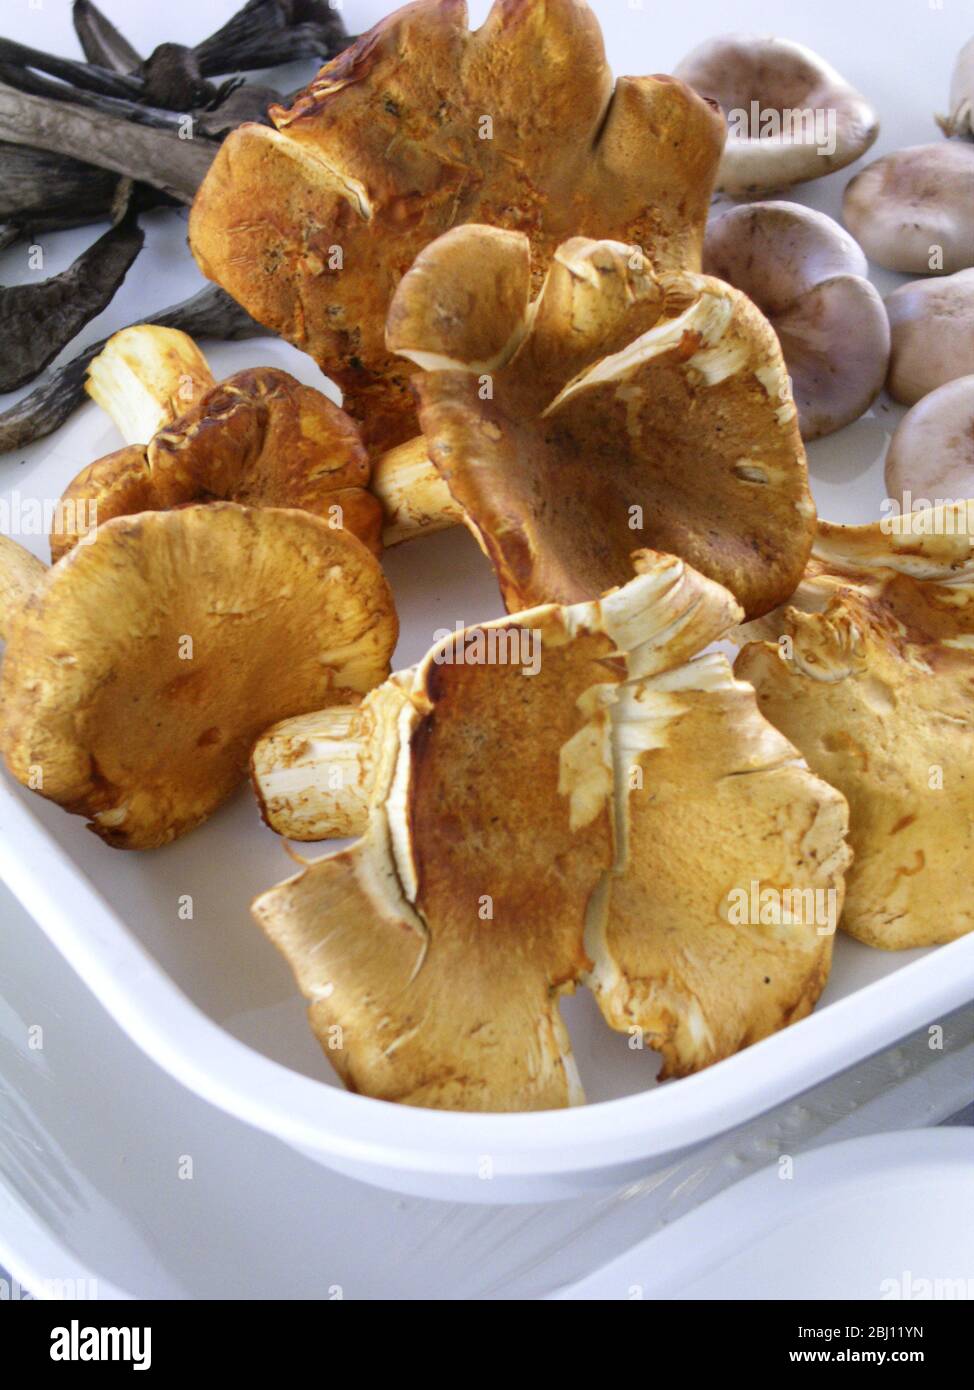 Exotic mushrooms prepared ready for cooking - Stock Photo